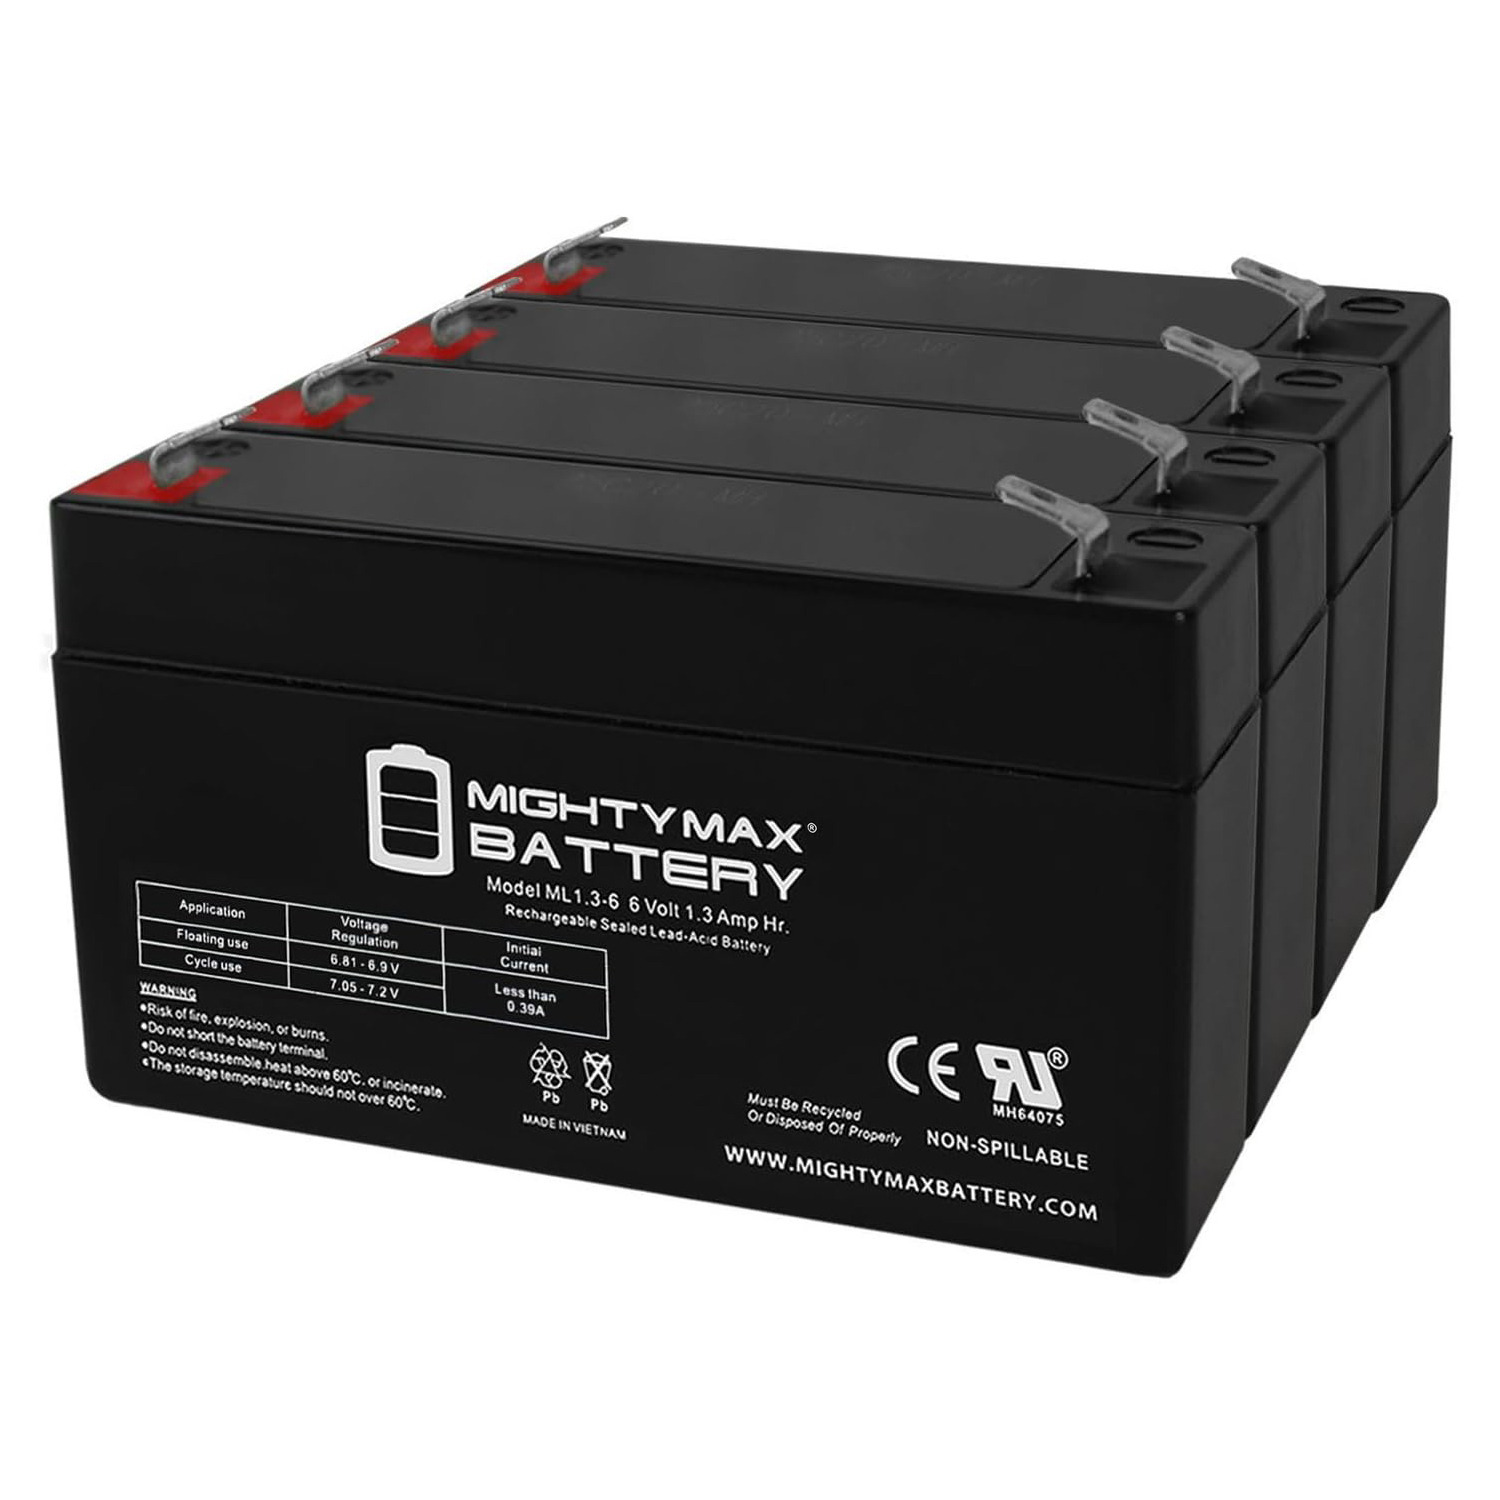 6V 1.3Ah SLA Replacement Battery for Portalac GS RBC48 - 4 Pack